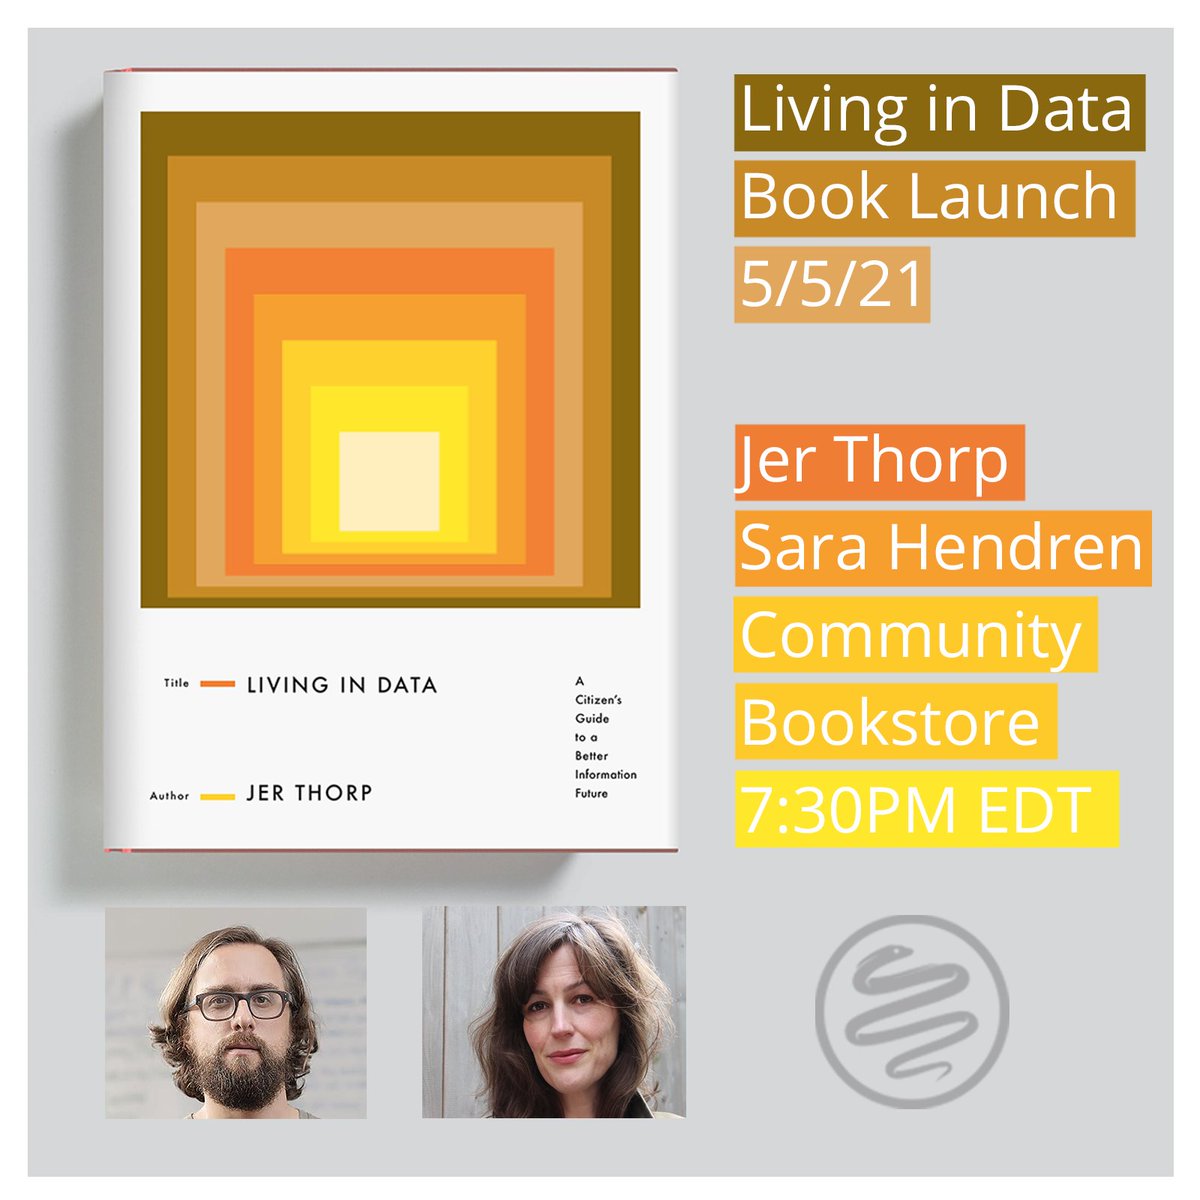 Good morning! Today's the day: Sara Hendren joins me at 7:30 ET to officially release Living in Data out in the world. Hosted by @CommunityBkstr! As tradition requires I'll break a tiny bottle of champagne on the cover of the first copy of the book. communitybookstore.net/thorp-data